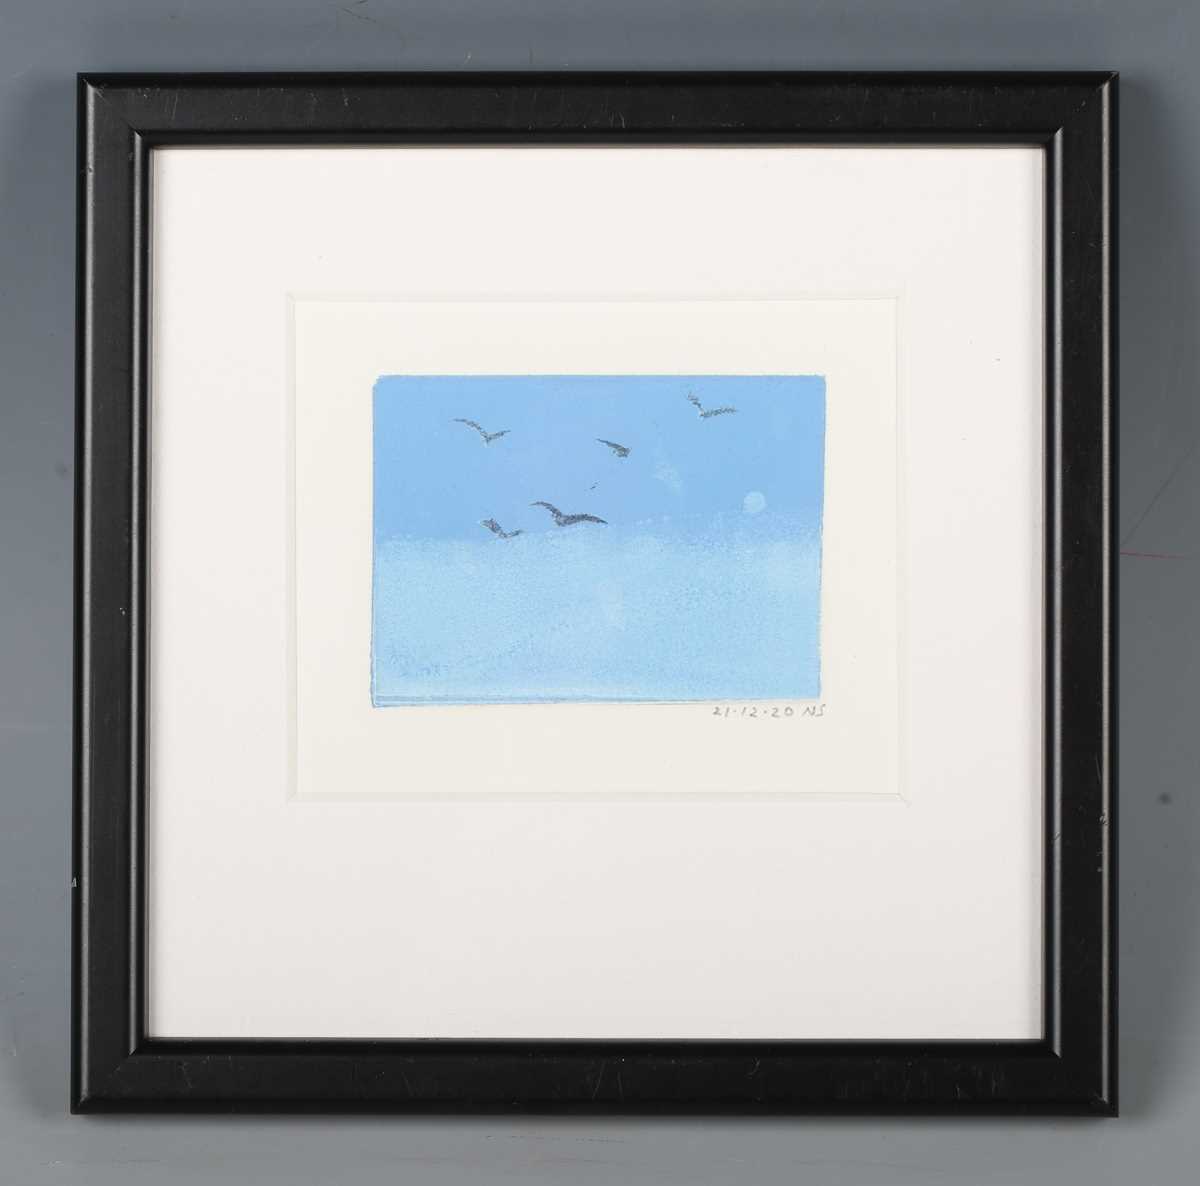 Enid Marx – ‘Goosey, Goosey, Gander’, 20th century wood engraving, signed and editioned 9/50 in - Image 8 of 14